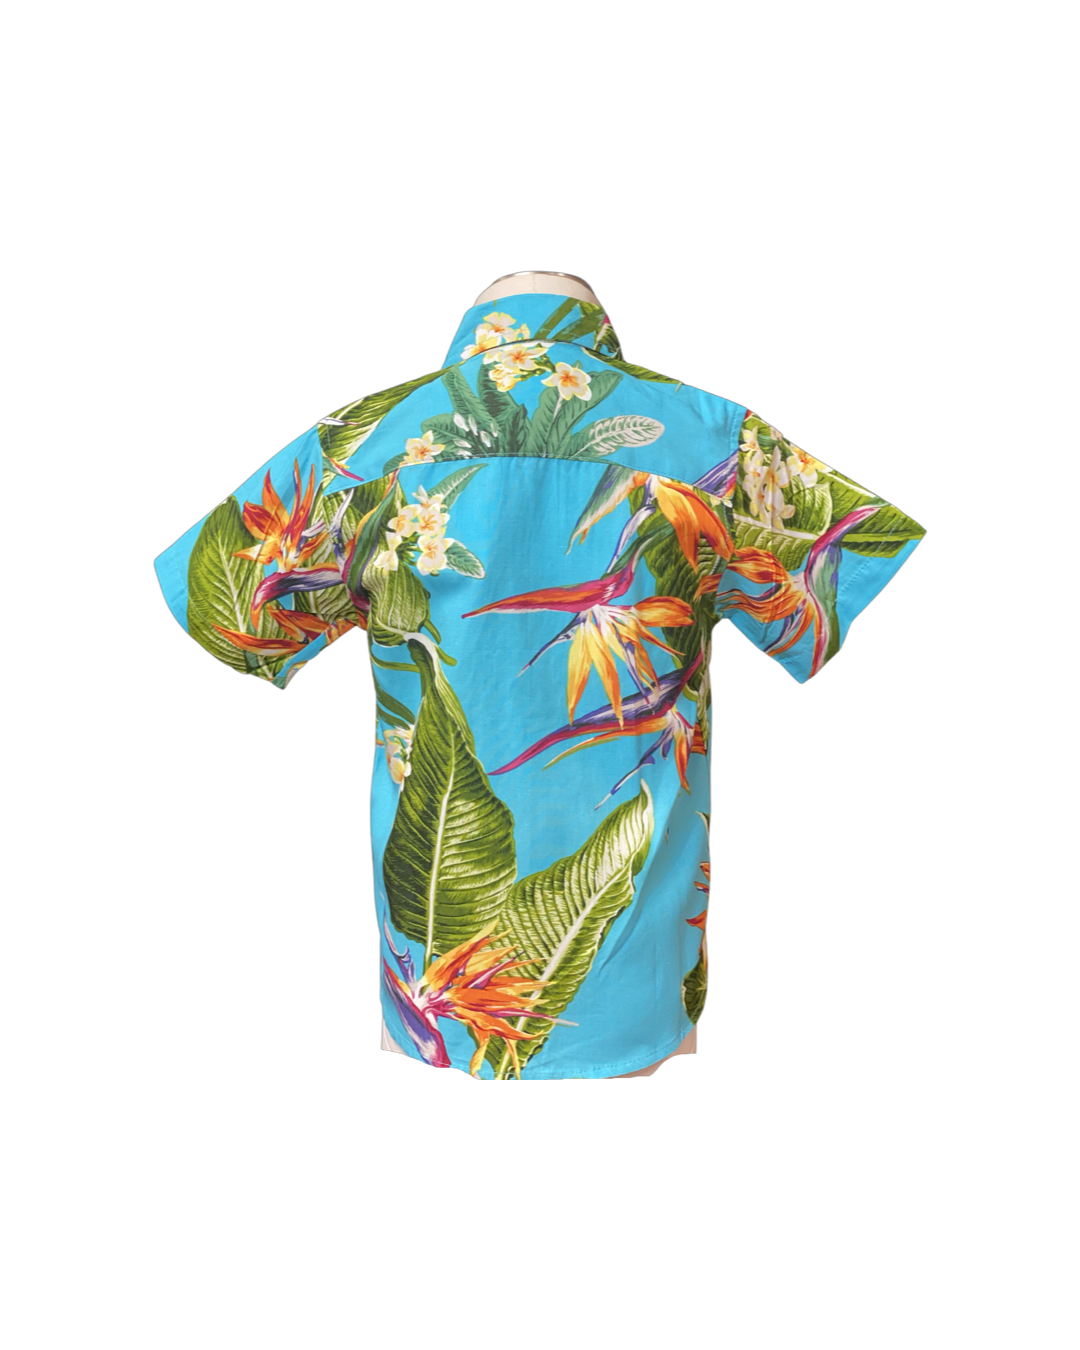 boys hawaiian shirt, birds of paradise, turquoise, poly cotton, slim cut fit, size up recommended, aloha shirt, unisex, Coradorables, aloha wear, resort wear, family matching  